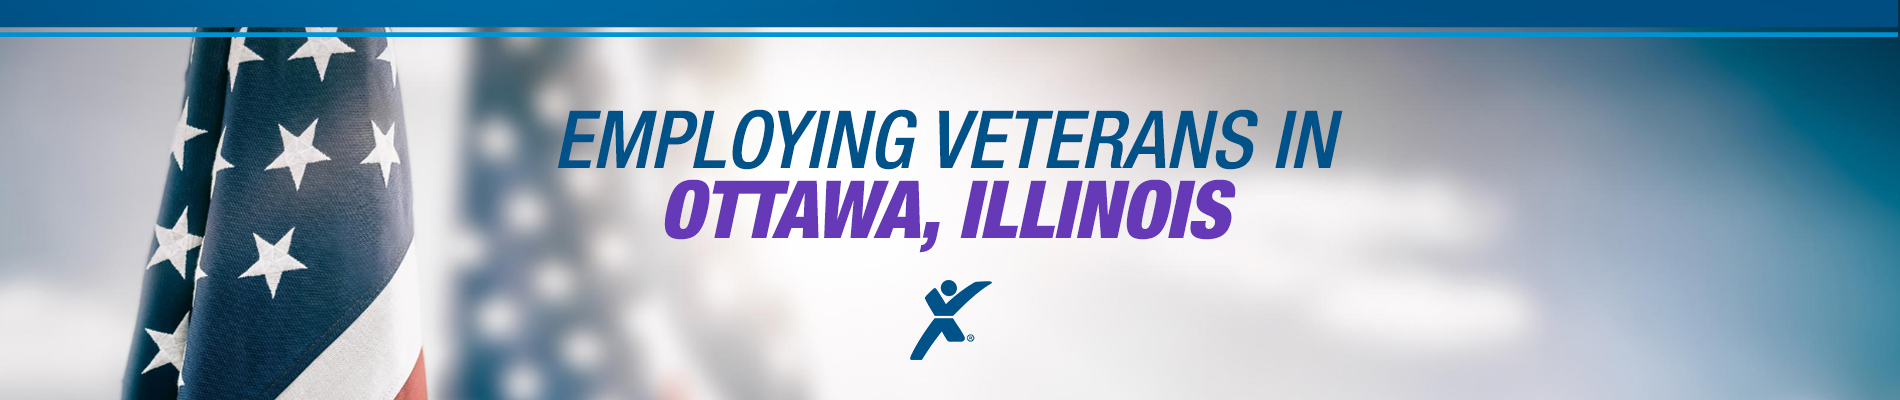 Express Has Job Opportunities for Veterans in Ottawa, IL